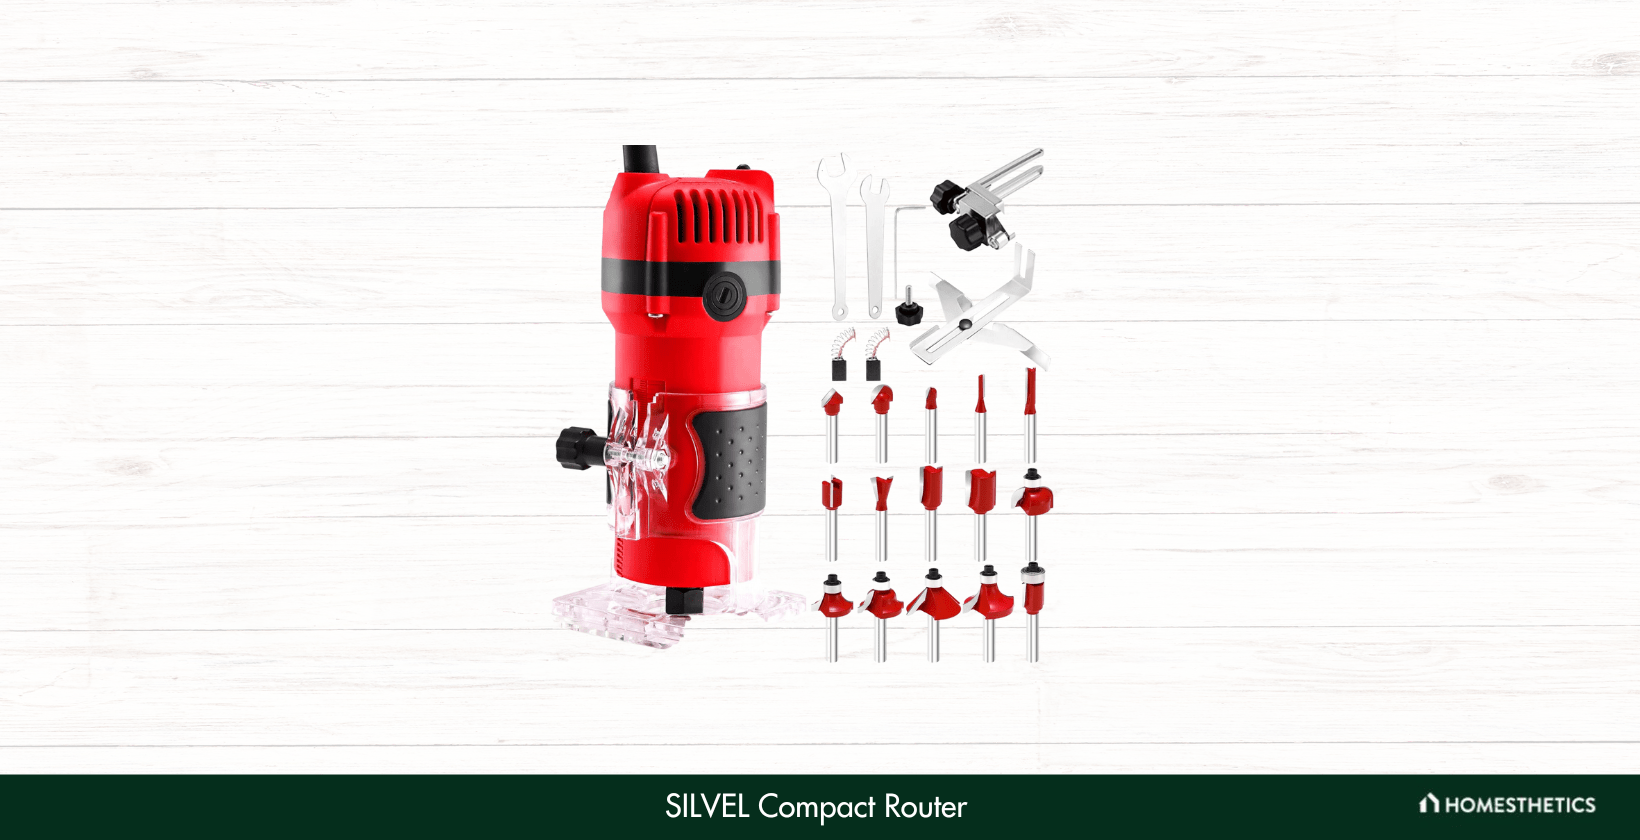 9. SILVEL Compact Router